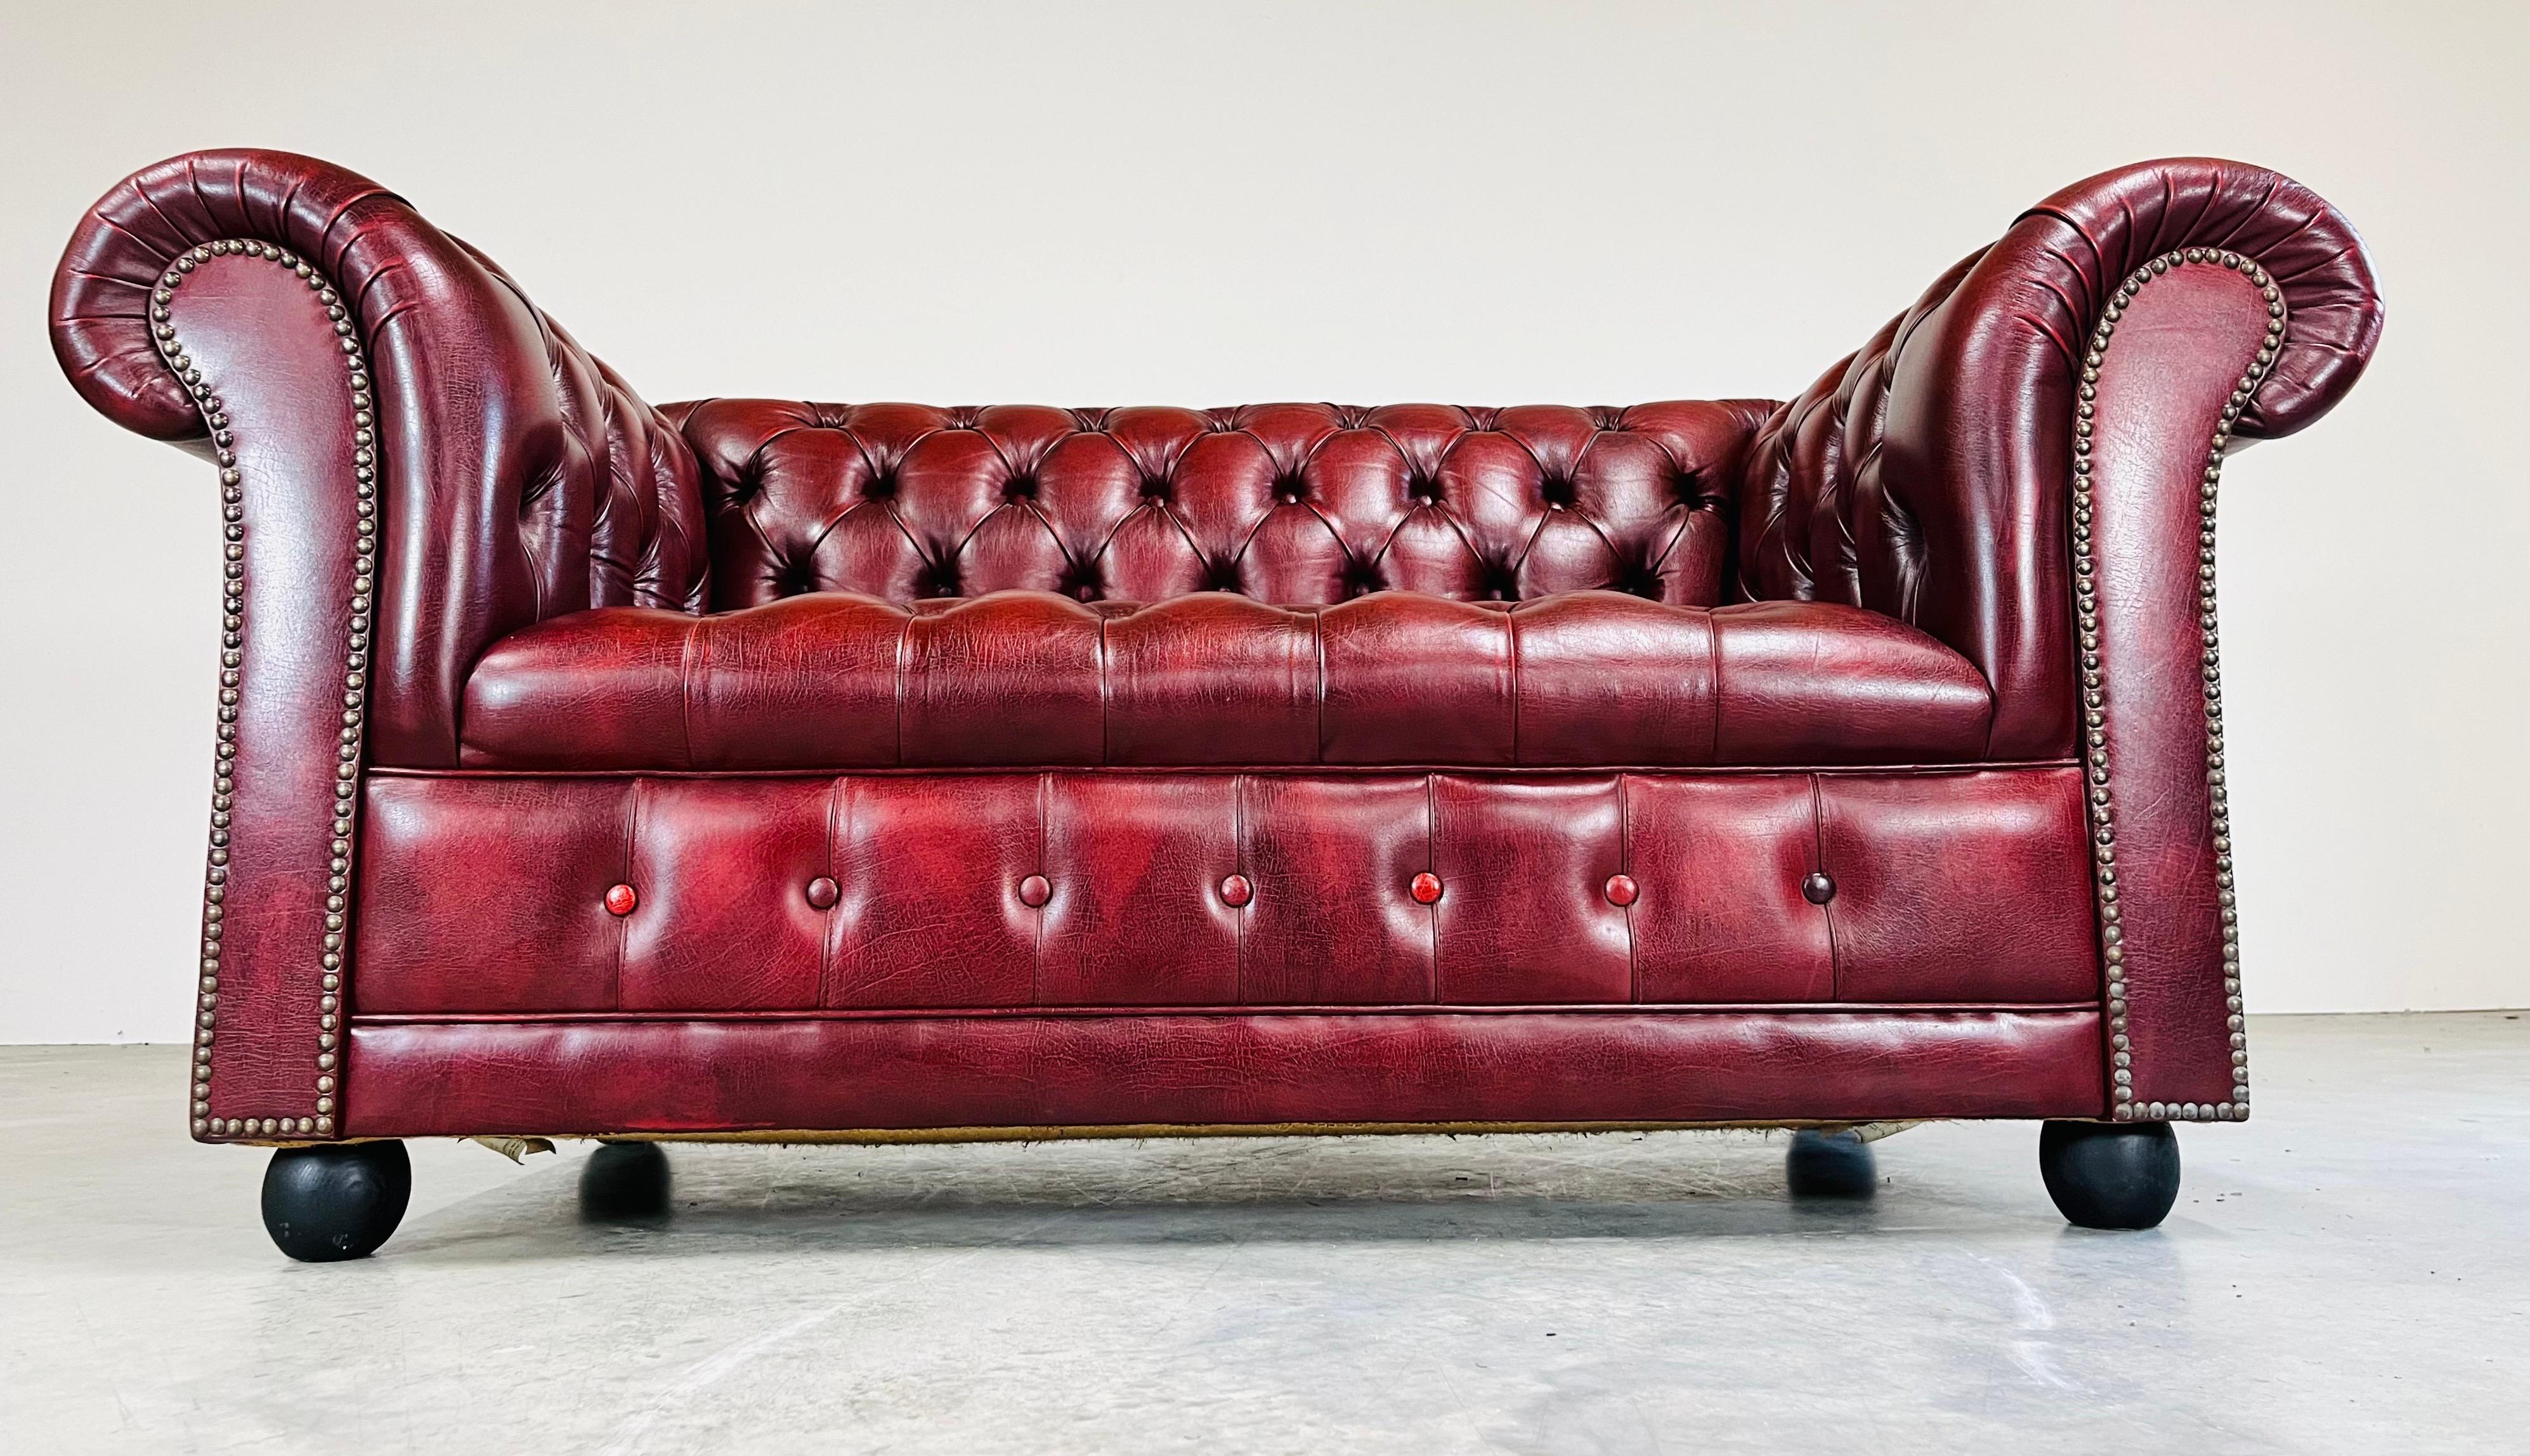 A stunning Chesterfield 2-seater sofa in oxblood leather having turned onyx mahogany cannonball feet by Action Furniture Ltd. Of Great Britain where the finest Chesterfield sofas are made. 
Circa 1970. 
In outstanding condition having no cuts, holes